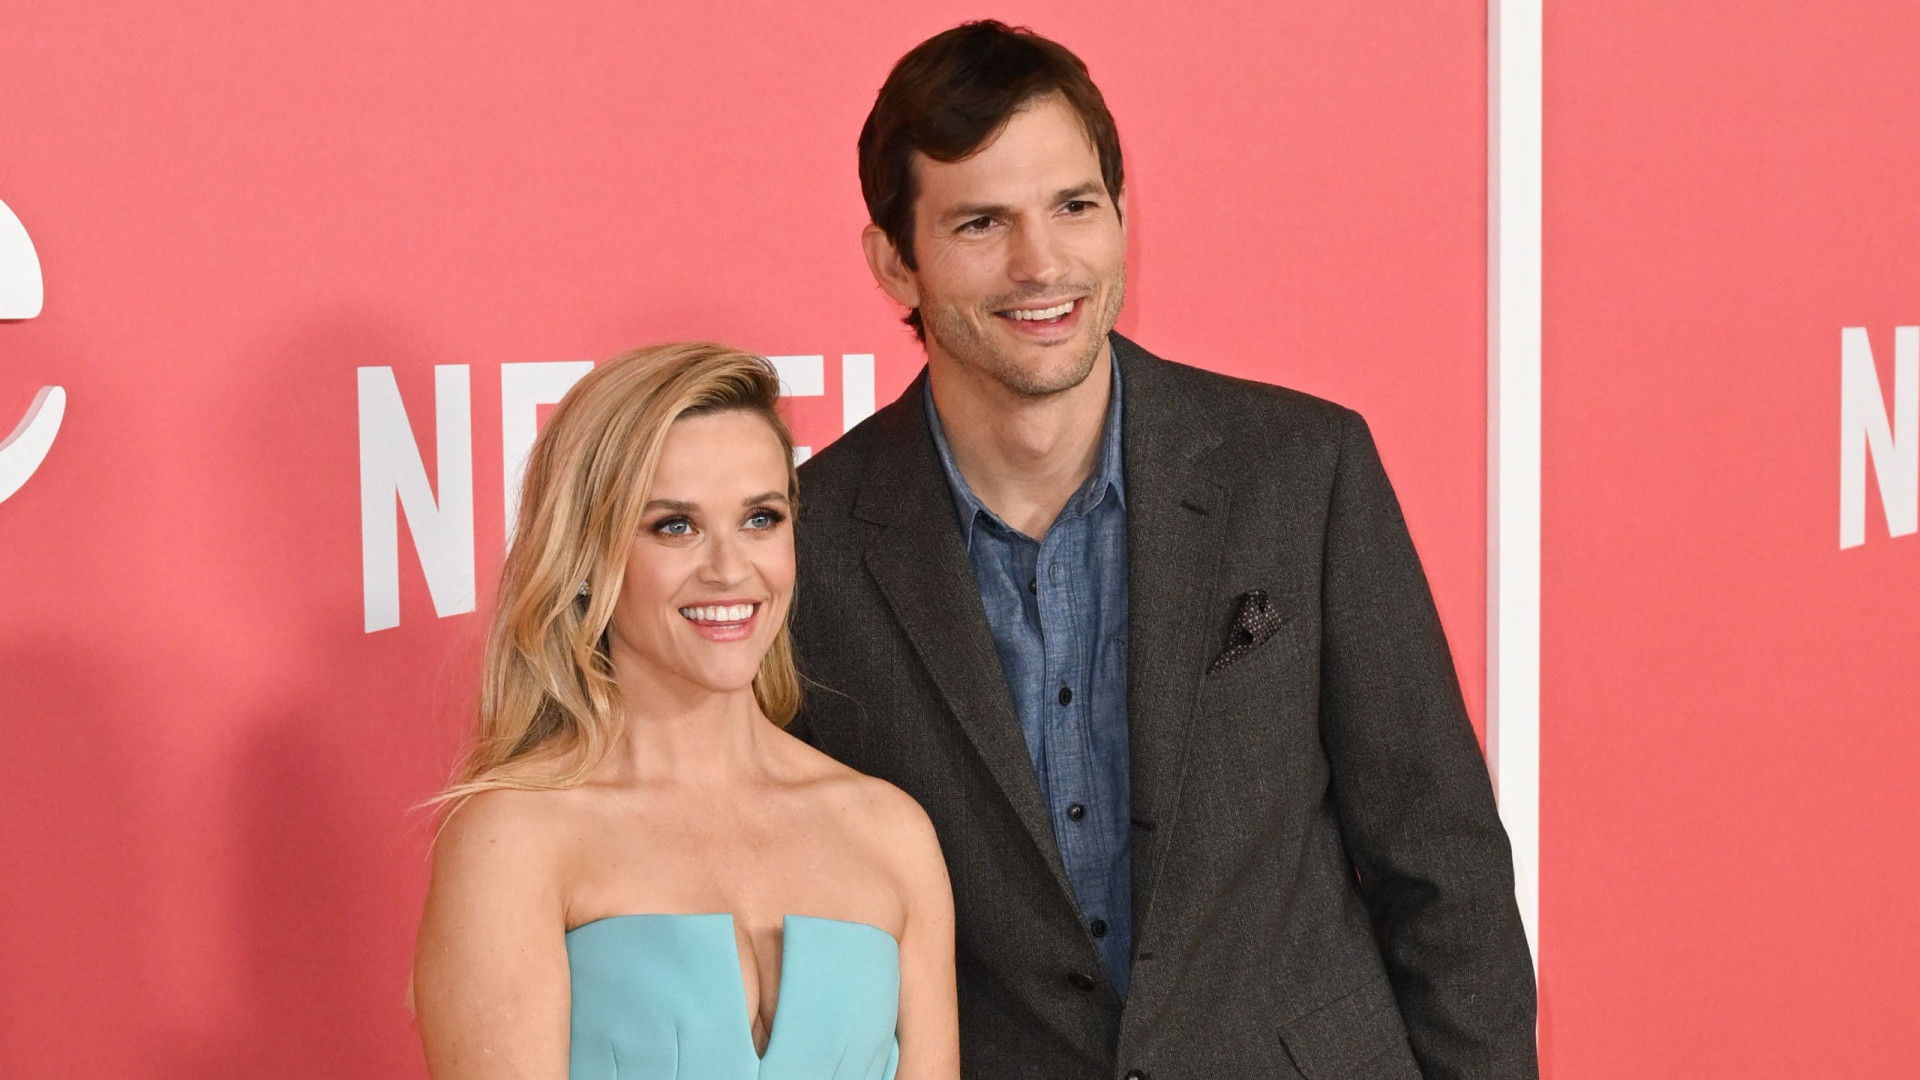 Ashton Kutcher wearing a dark gray suit and Reese Witherspoon wearing a cyan blue dress